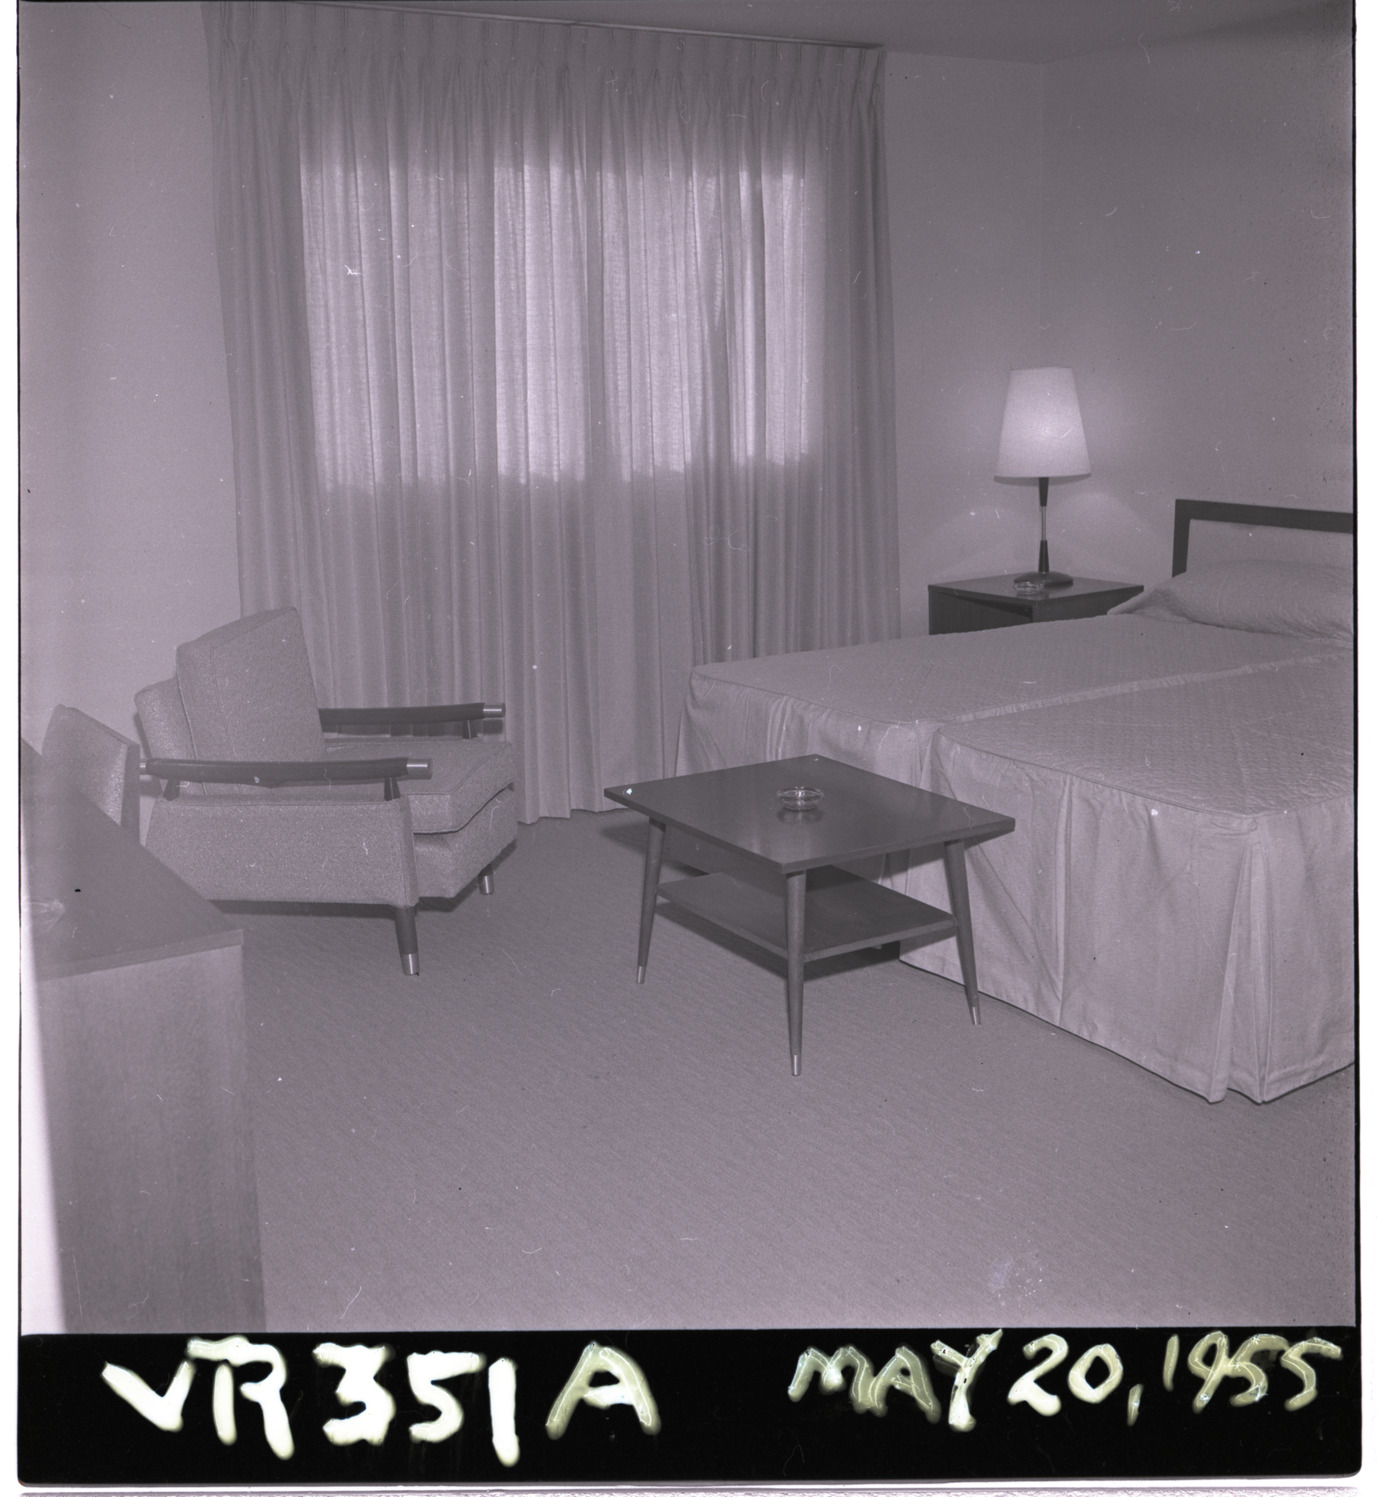 Guest room, Image 01